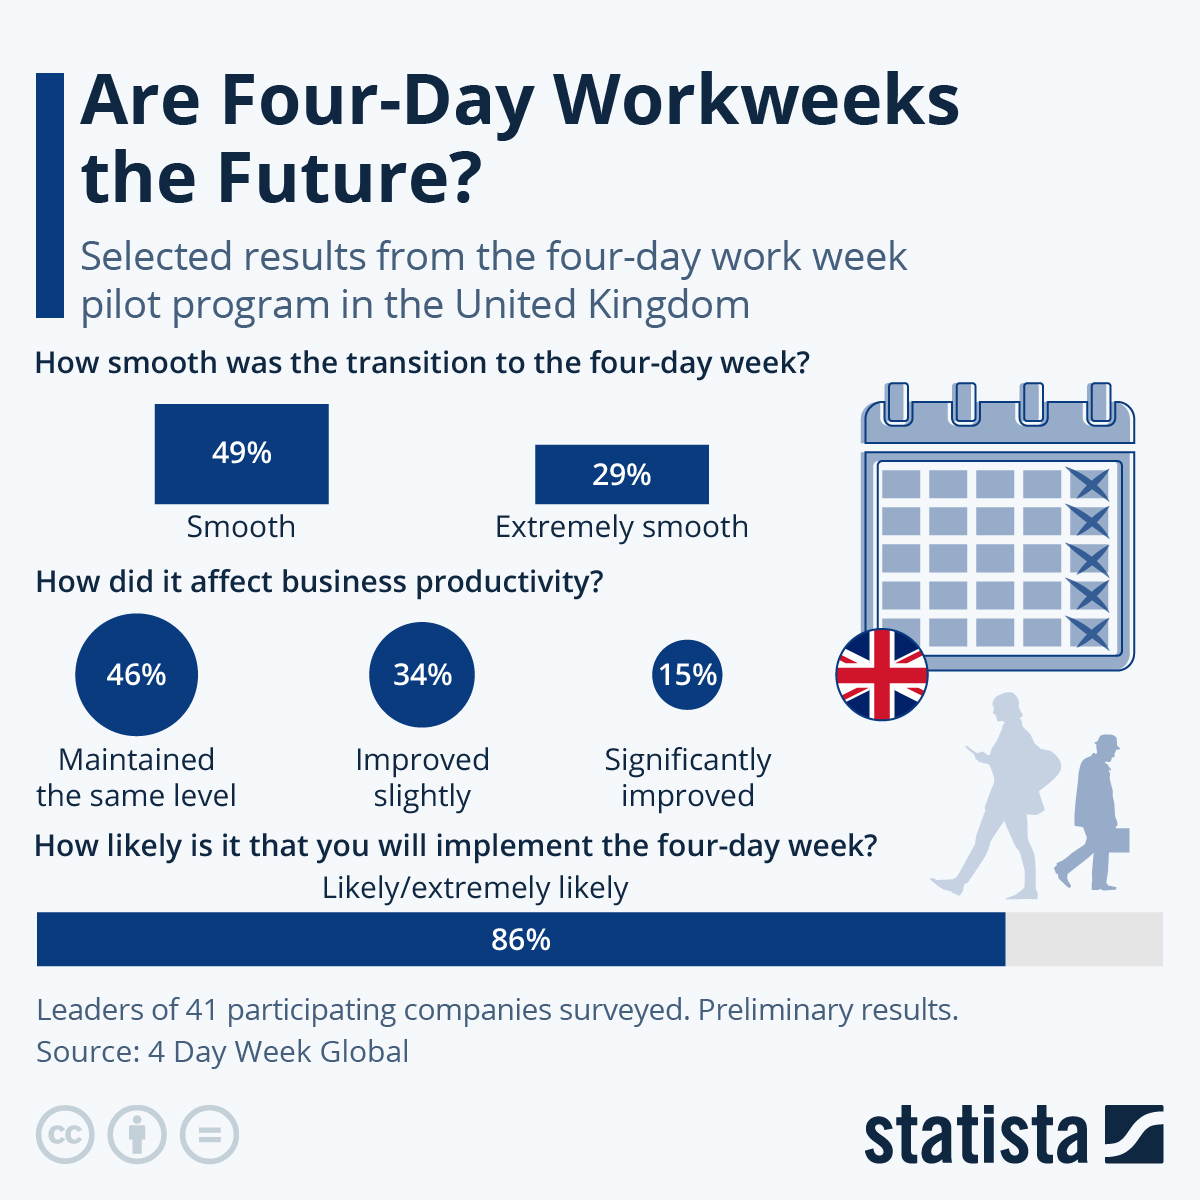 The future of Four-Day Workweeks